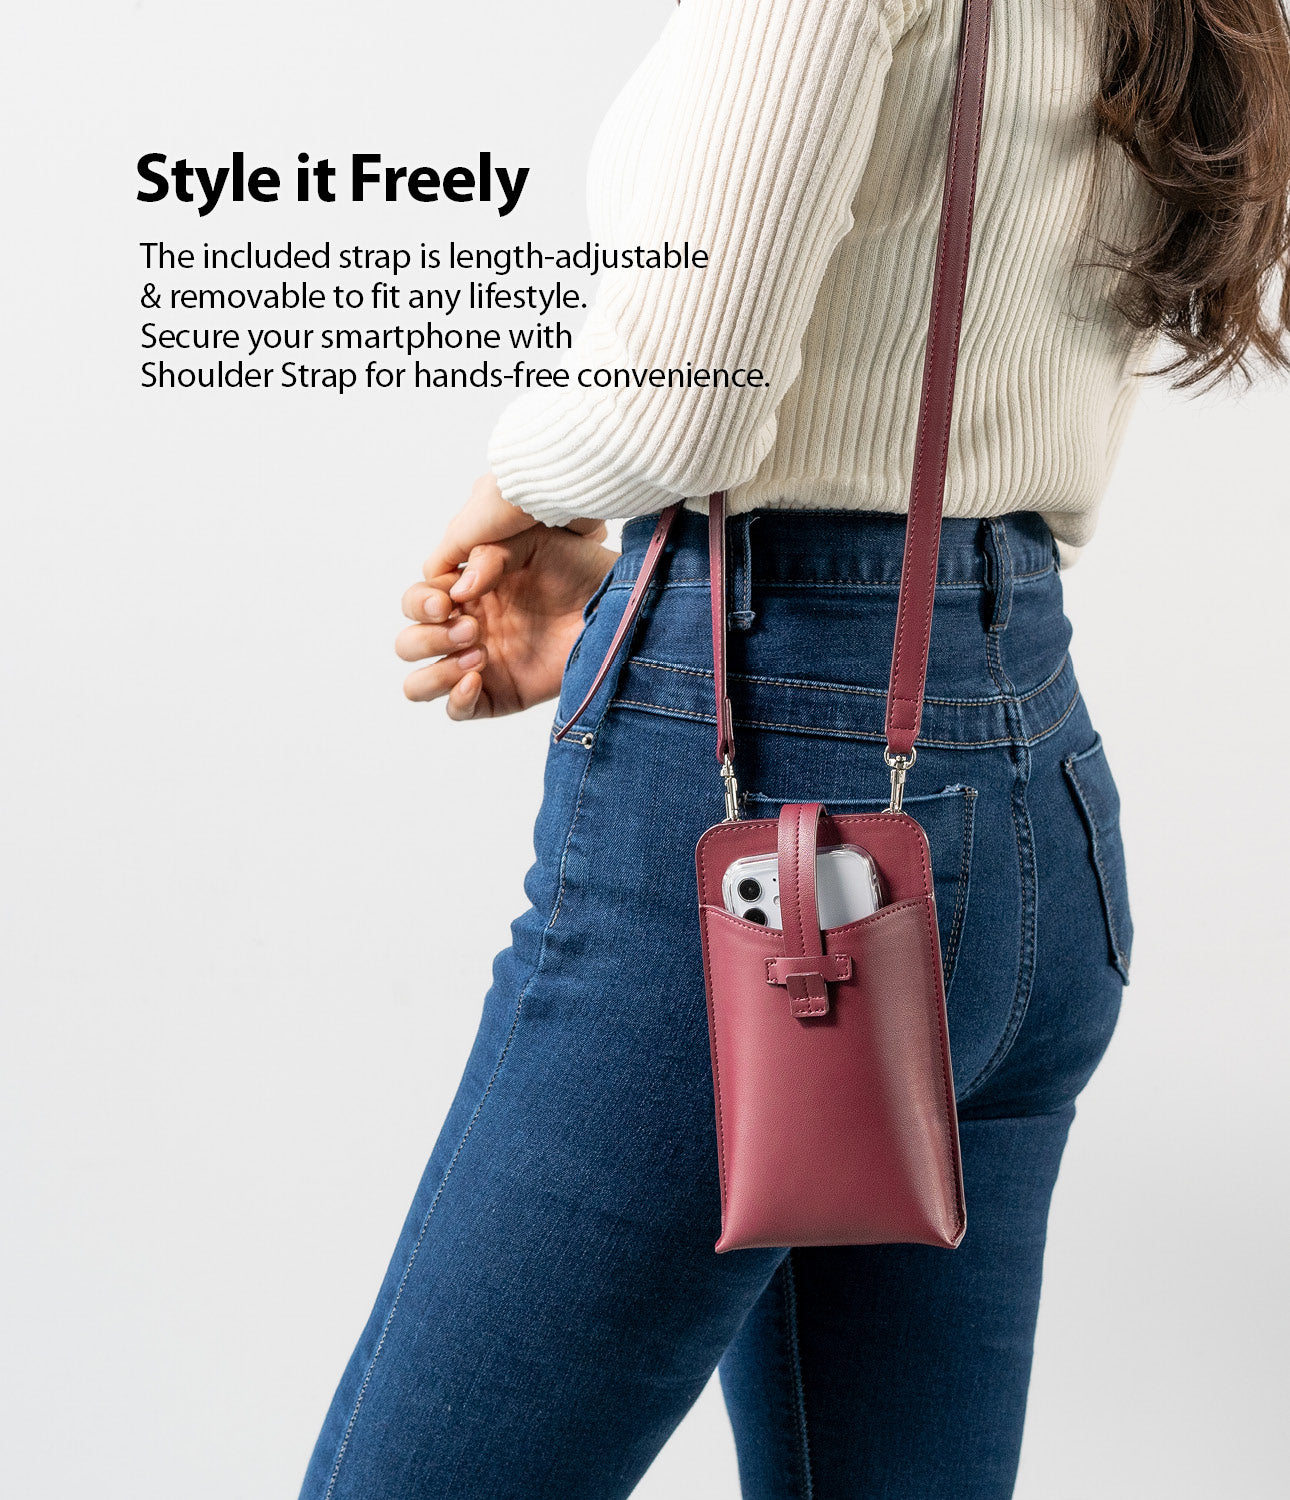 style it freely - the included strap is length-adjustable & removable to fit any style. secure your smartphone with shoulder strap for hands-free convenience